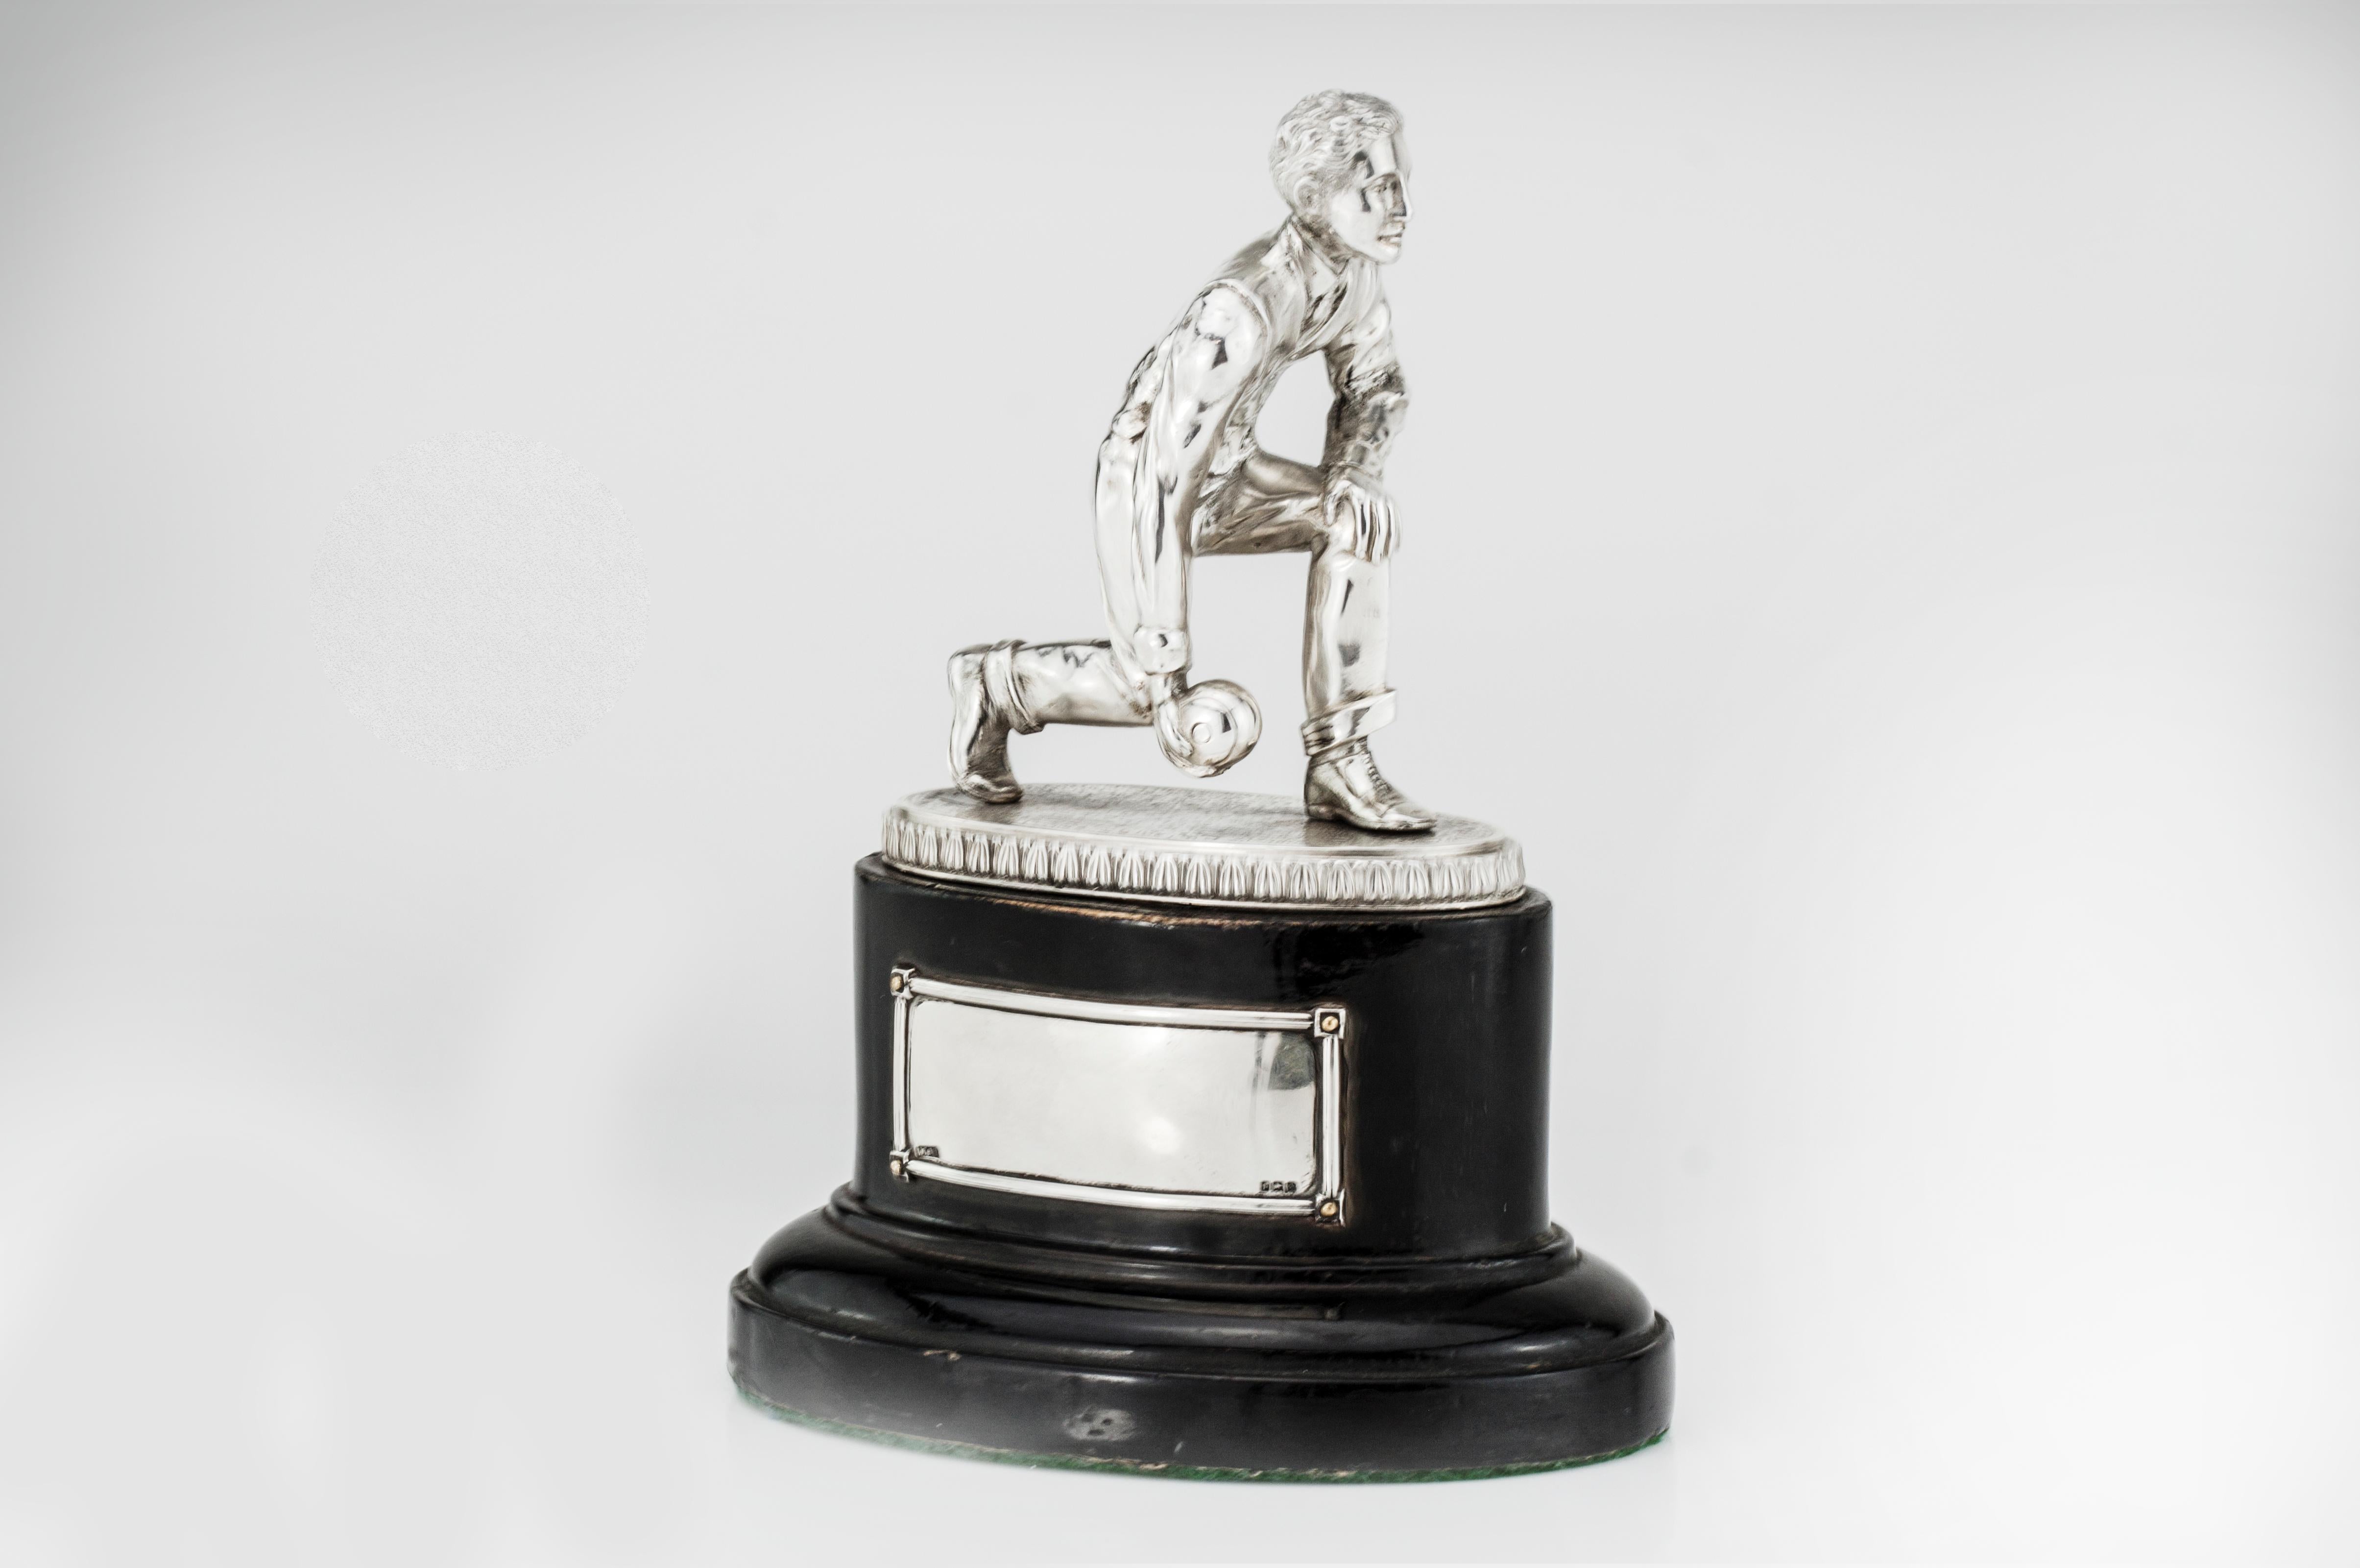 Silver statue 'Bowling player' with a wooden base, used as award or trophy
Maker: W.J.L (unidentified)
Made in 1923
Fully hallmarked.

Dimensions:
Approximate 13 x 8.5 x 17 cm
Weight: 559 grams

Condition: Minor surface wear from general